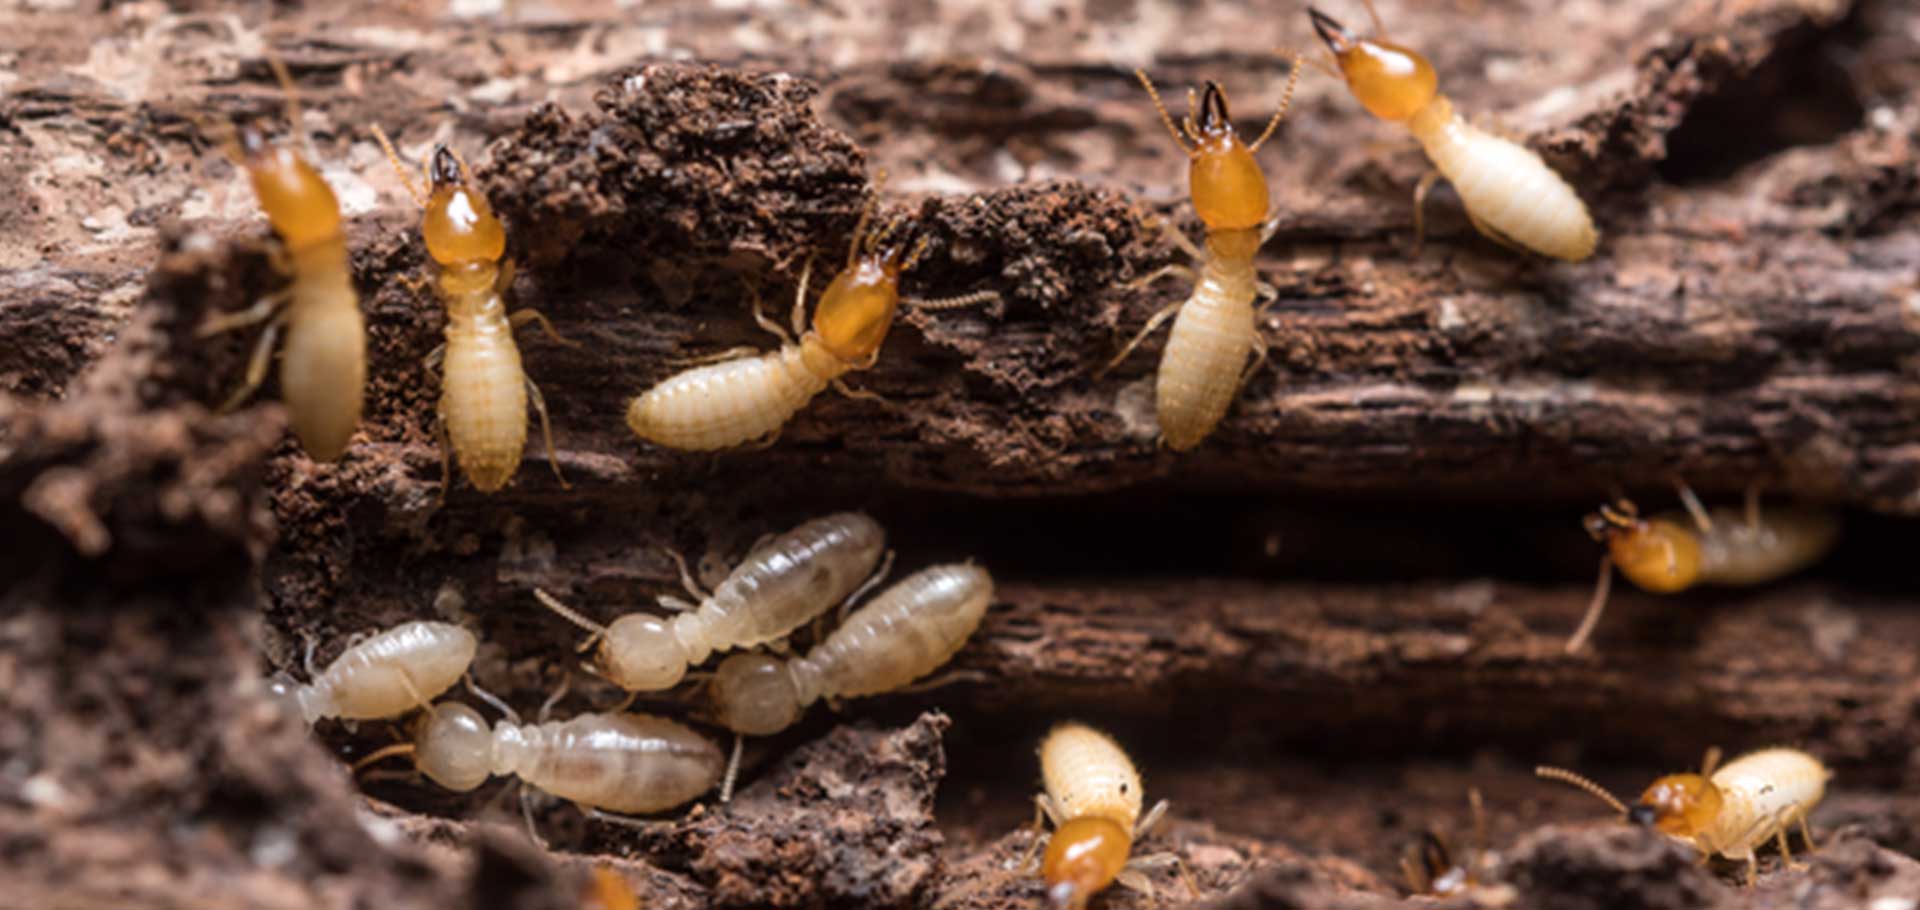 Texas termite season | what you have to know